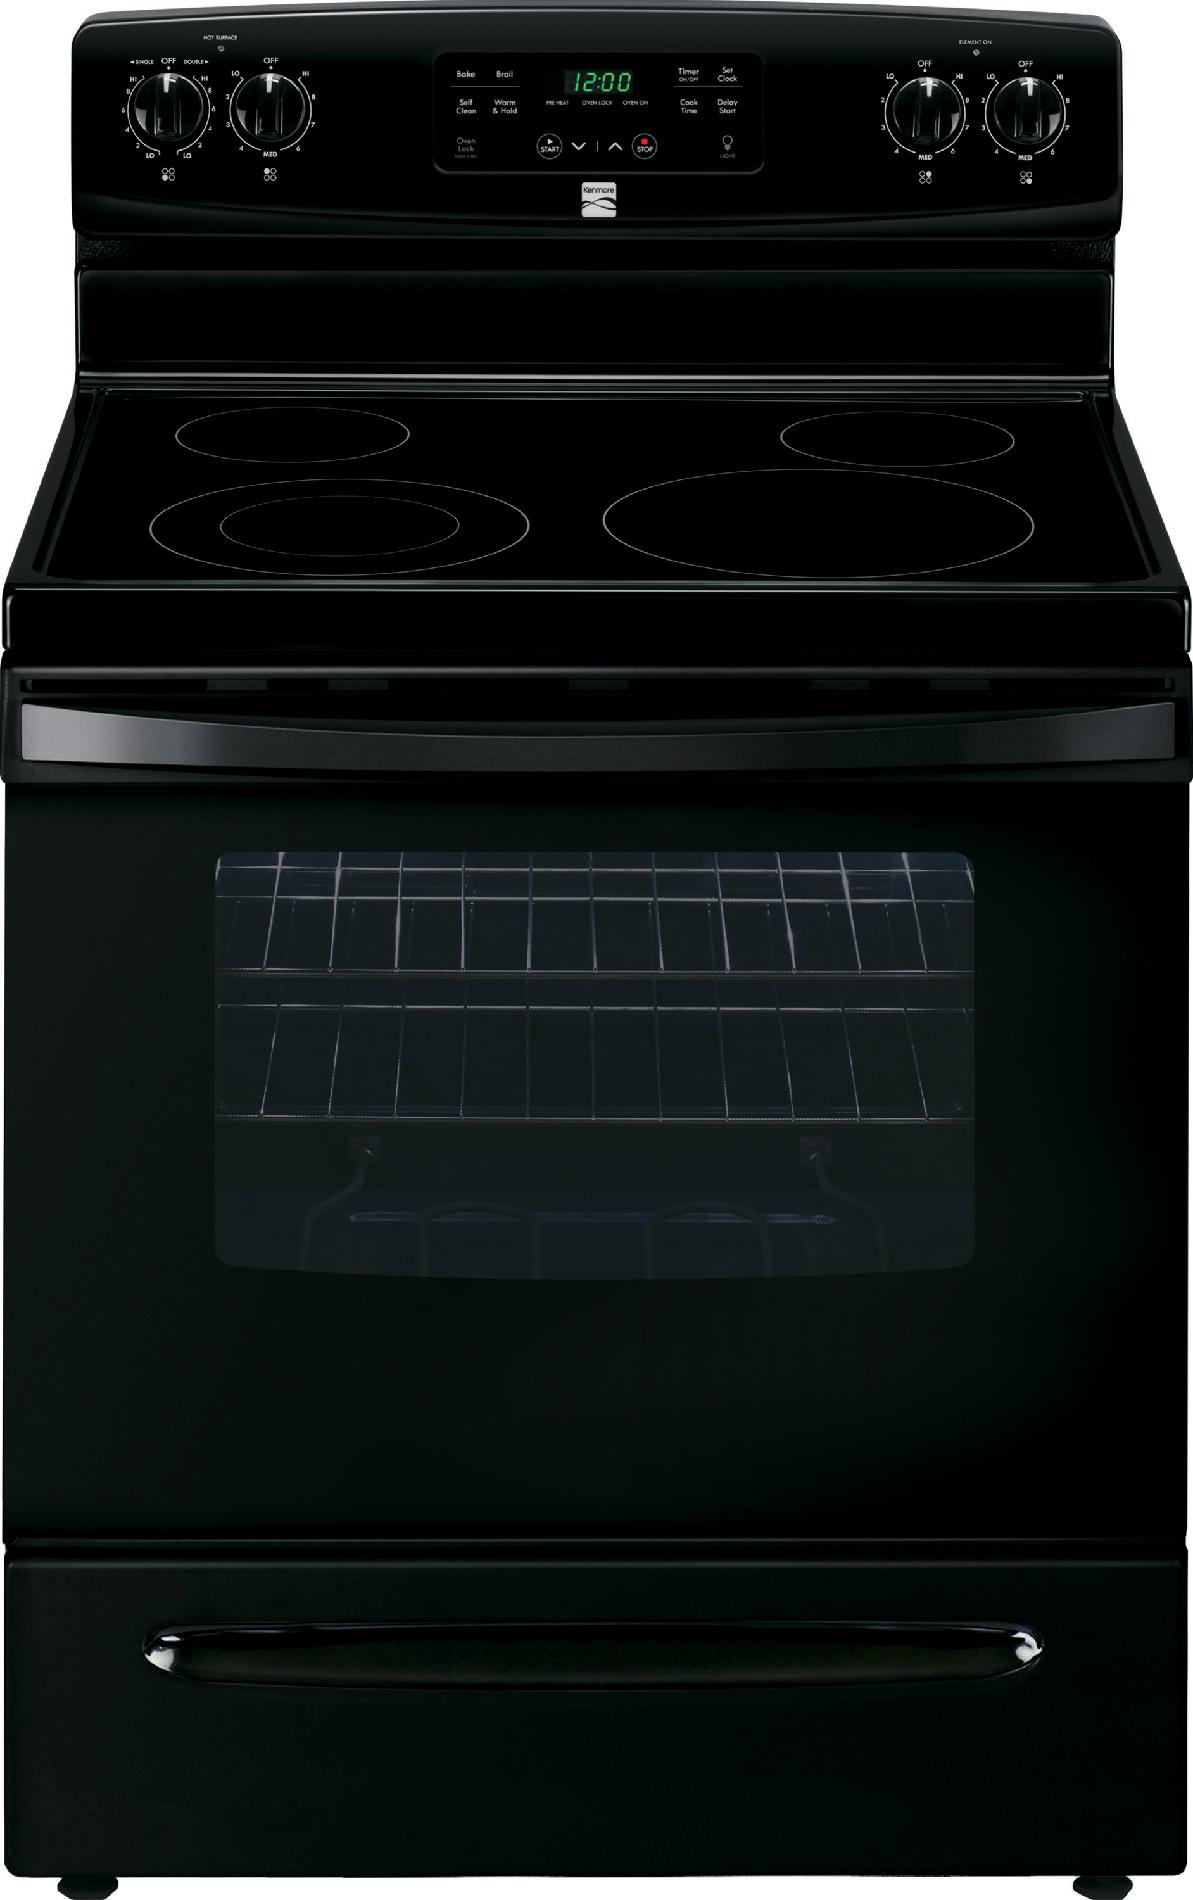 Electric Stove Kenmore Electric Stove Troubleshooting